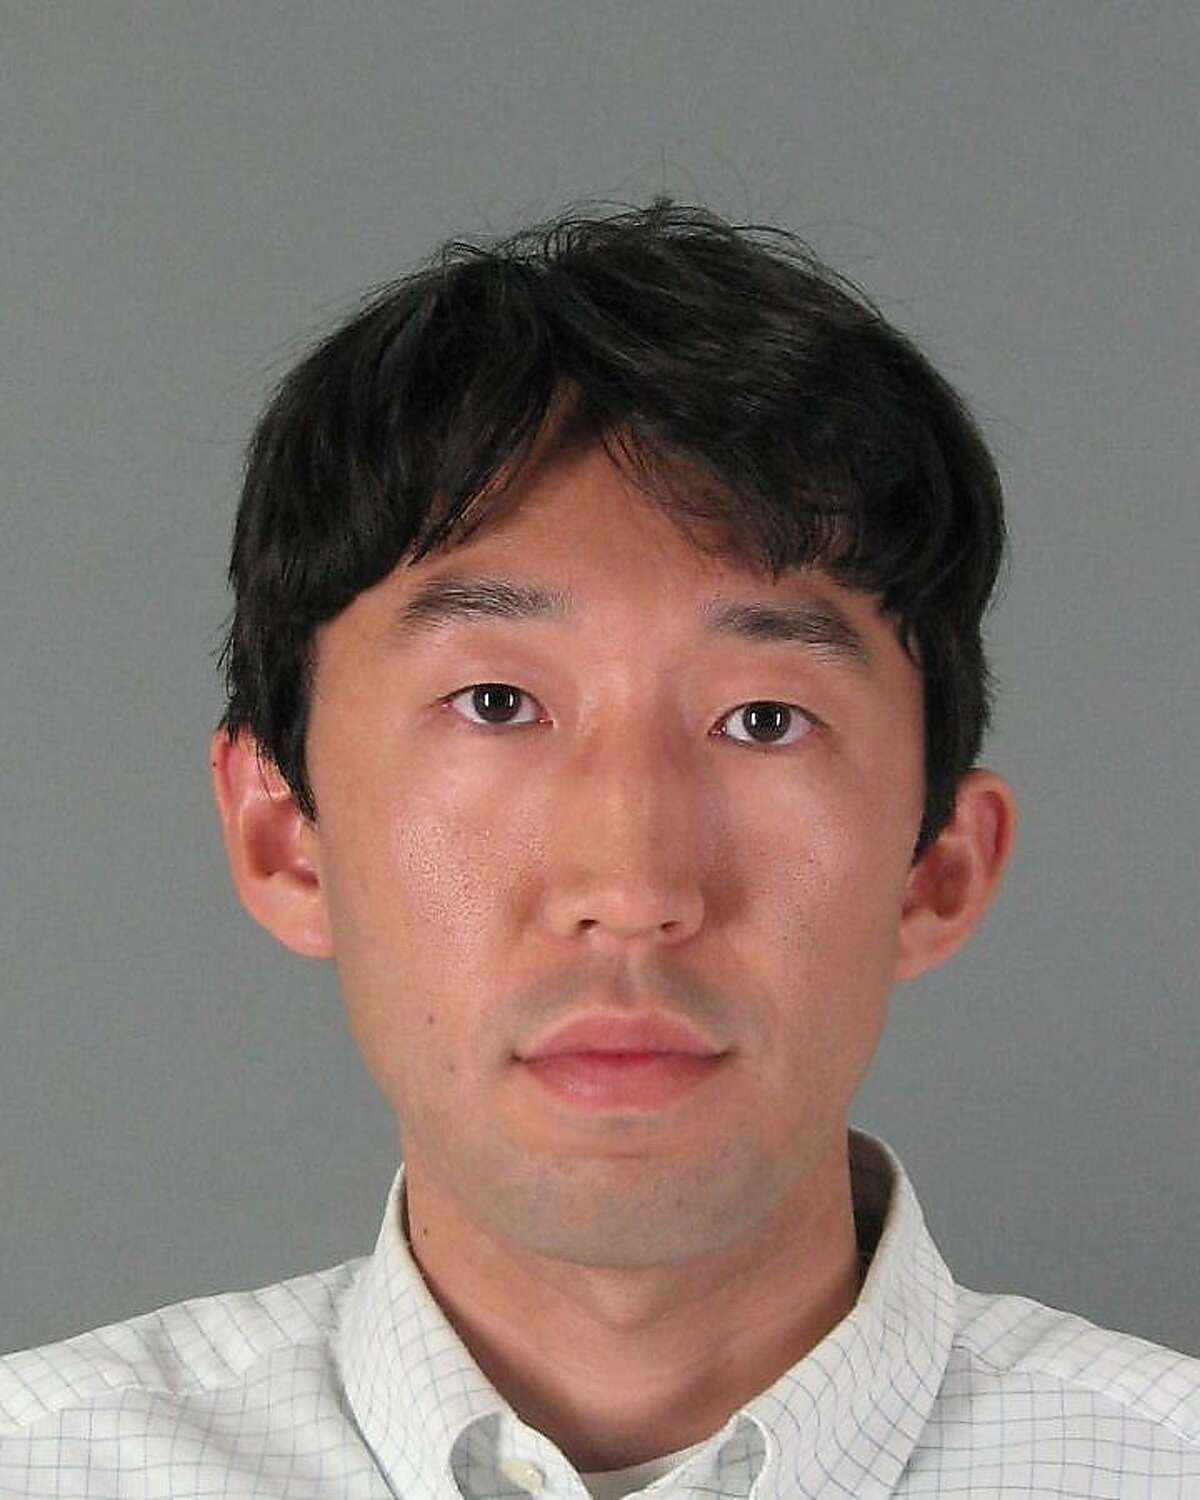 This photo provided by the San Mateo County Sheriff's Office via the San Jose Mercury News shows San Francisco Japanese Vice Consul Yoshiaki Nagaya, a 32-year-old San Bruno resident, facing domestic violence charges in San Mateo County. Nagaya, 33,who serves as vice consul in the Consulate-General of Japan, is facing charges for the alleged abuse of Yuka Nagaya, his wife of about two years. (AP Photo/San Mateo County Sheriff's Office via San Jose Mercury News)